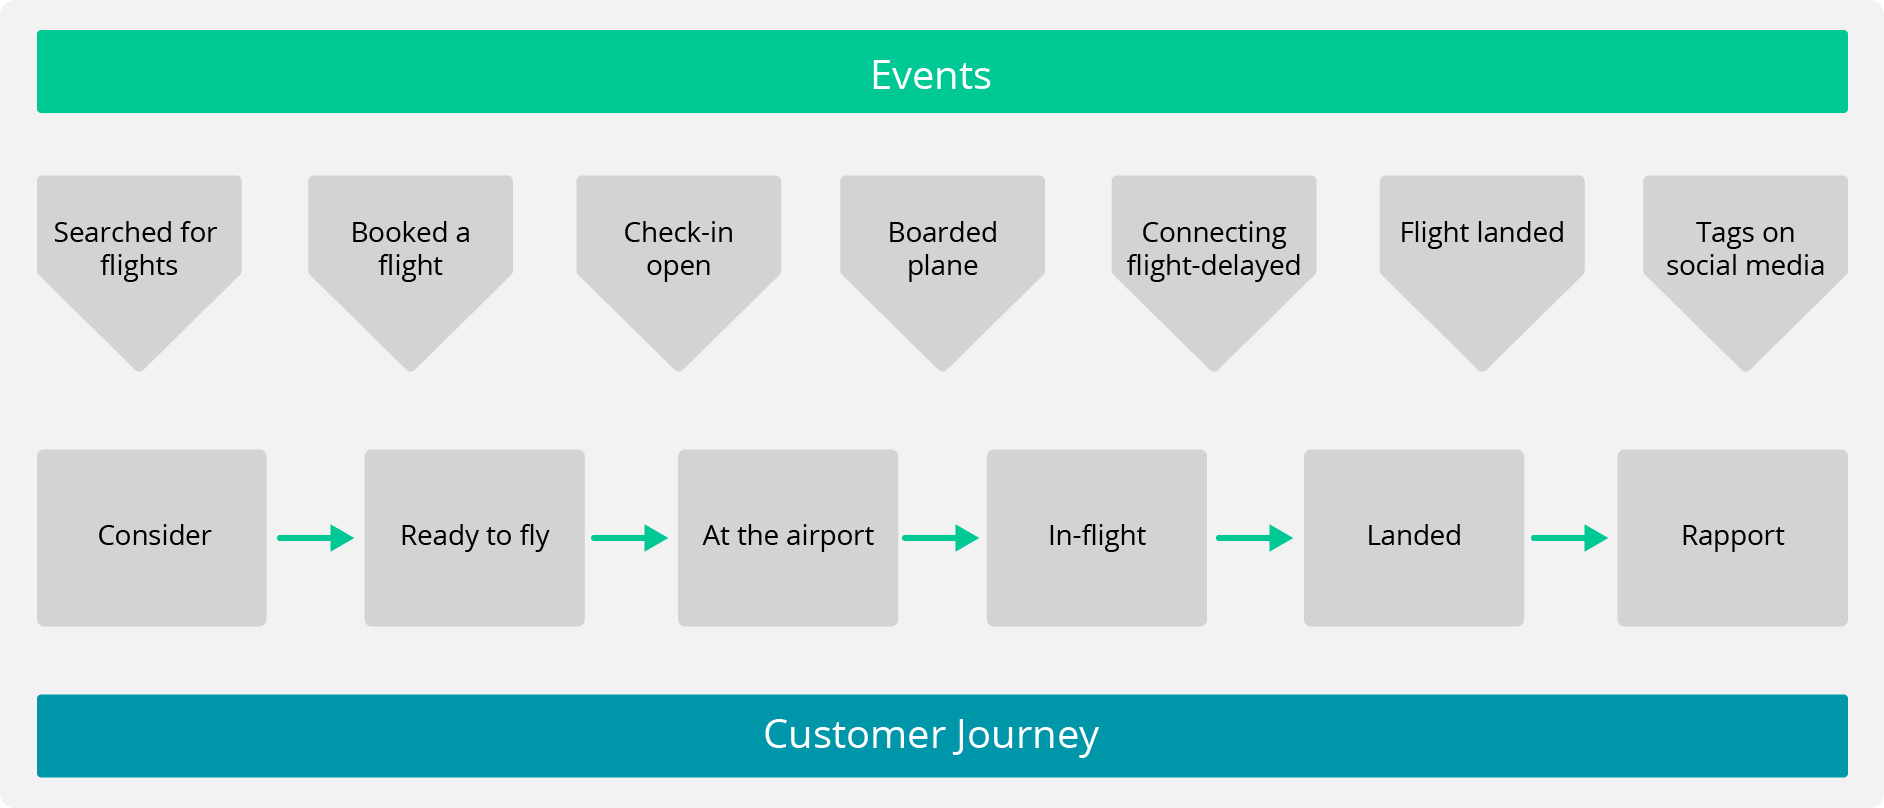 The flow of an event-driven airline, from "searched for flights" to building rapport along the customer journey